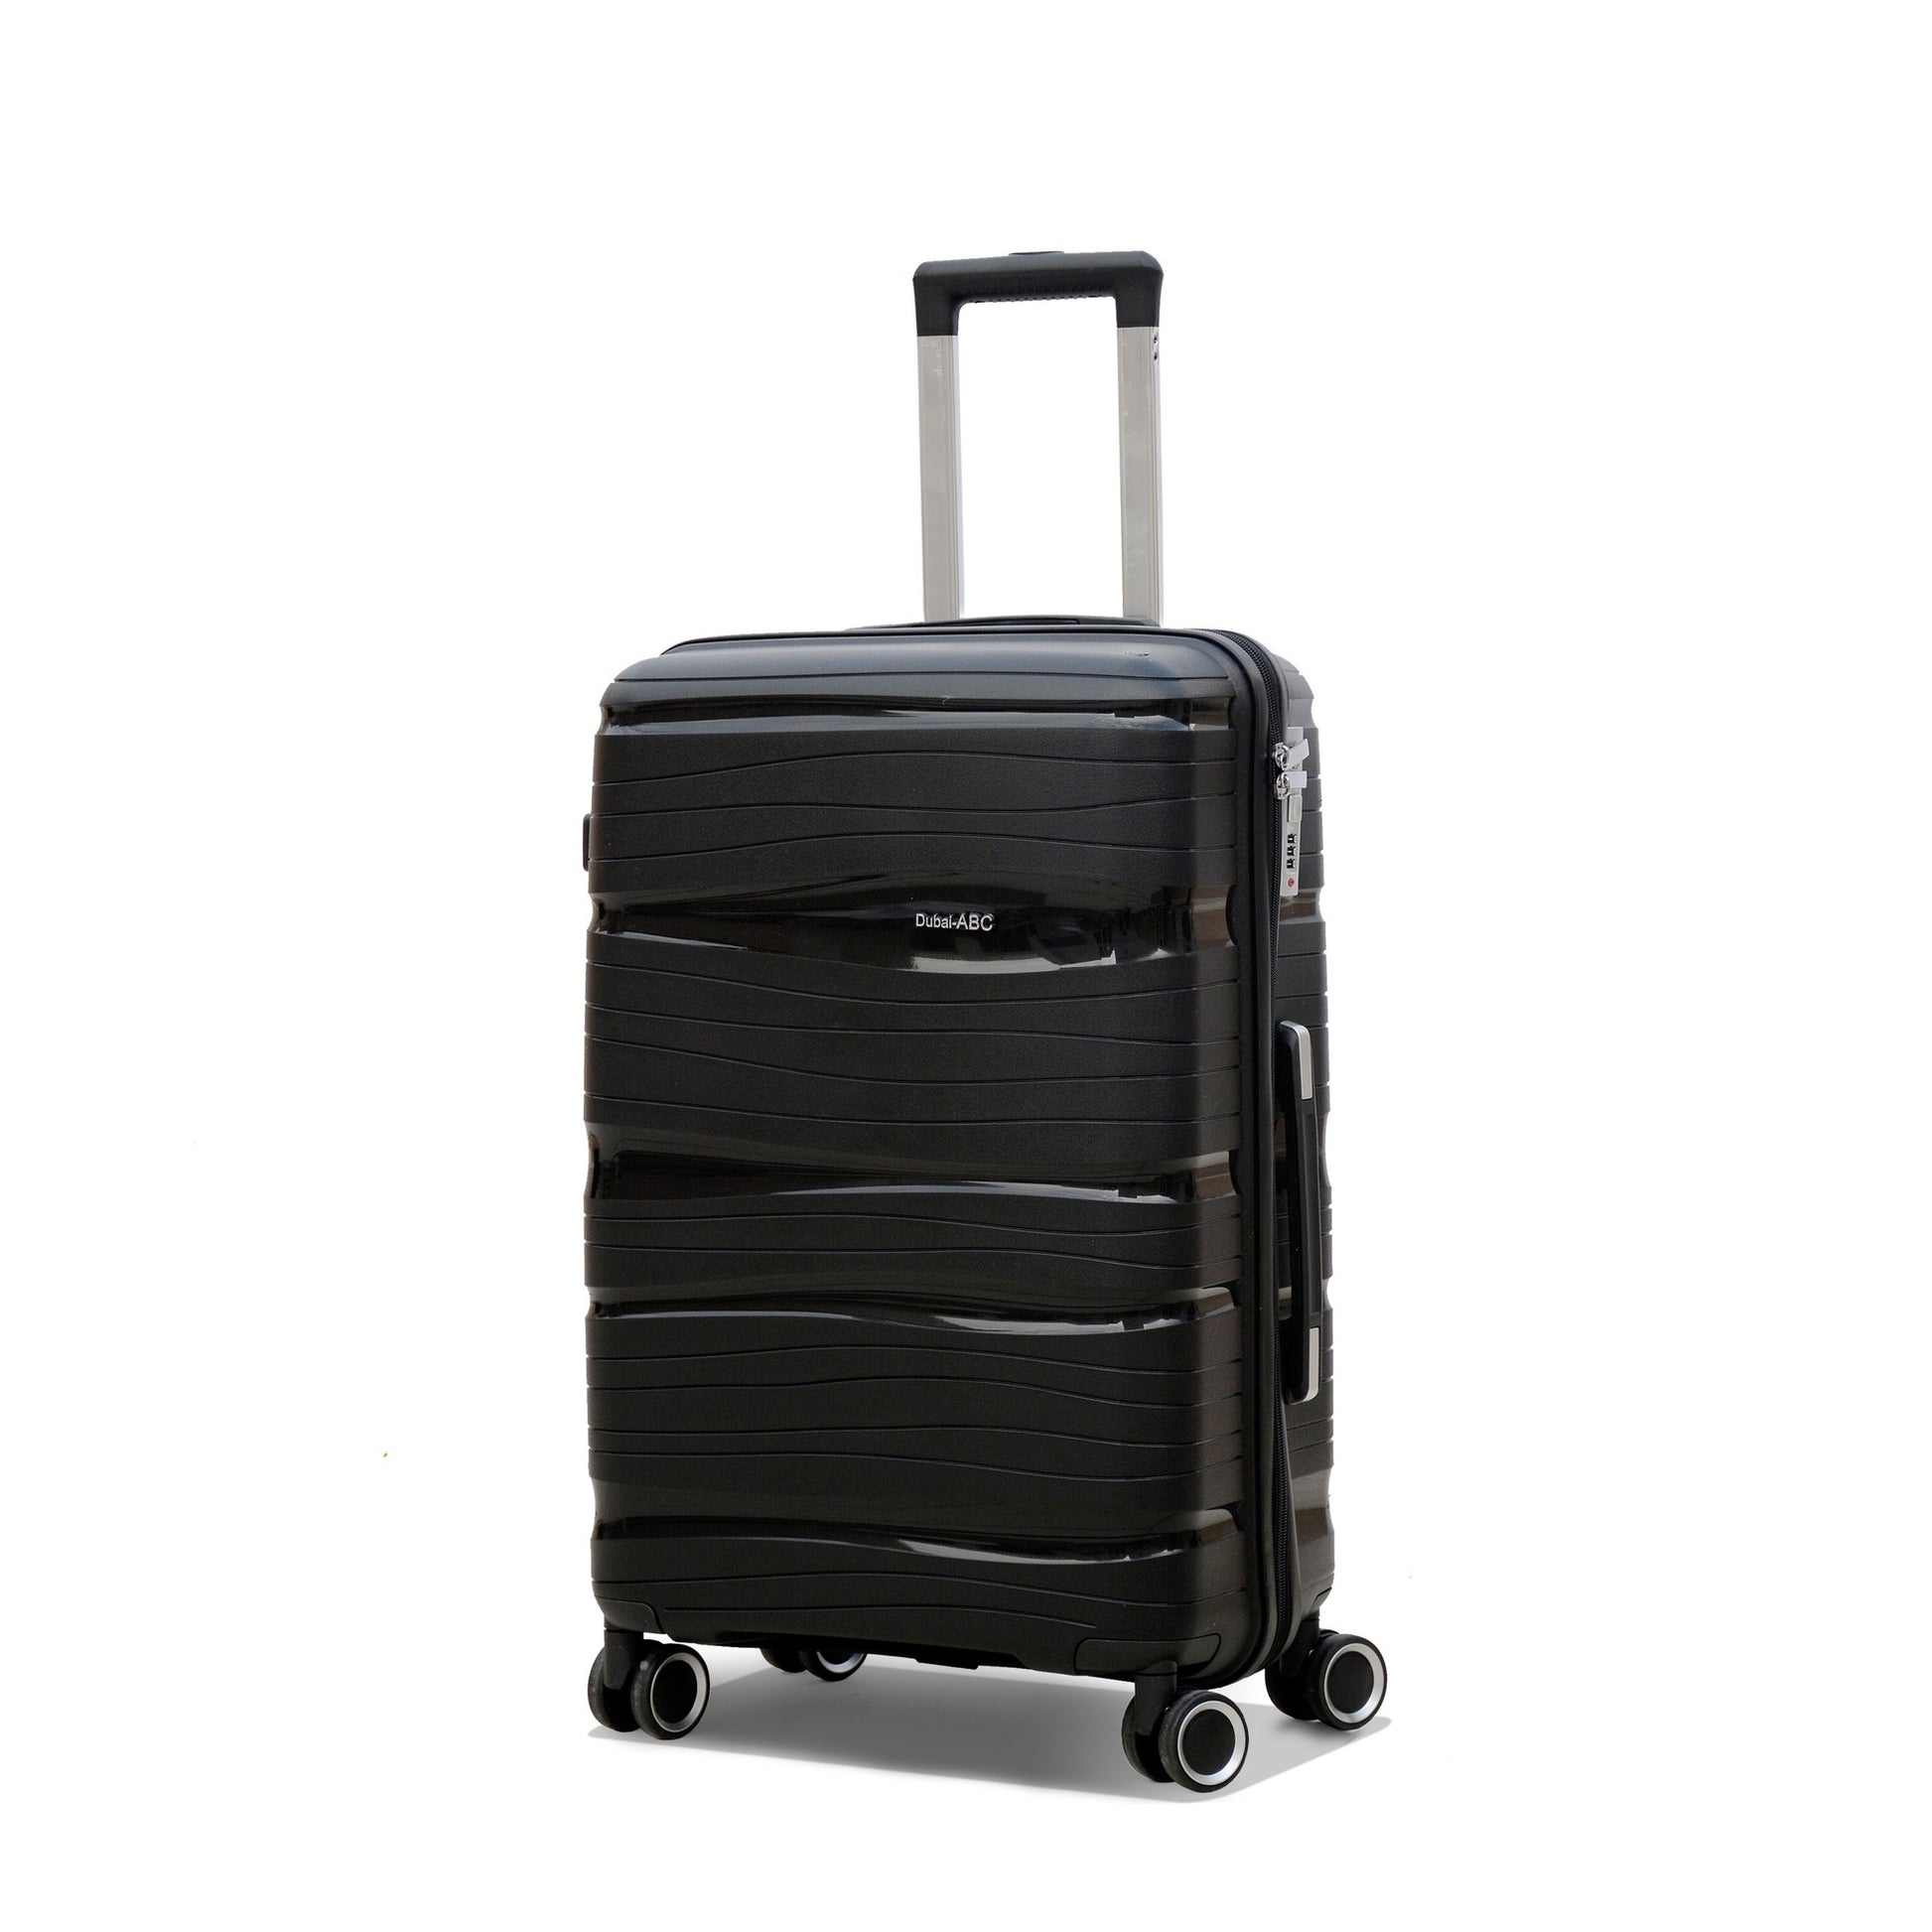 20" Black Colour Royal PP Lightweight Hard Case Carry On Trolley Bag With Double Spinner Wheel Zaappy.com